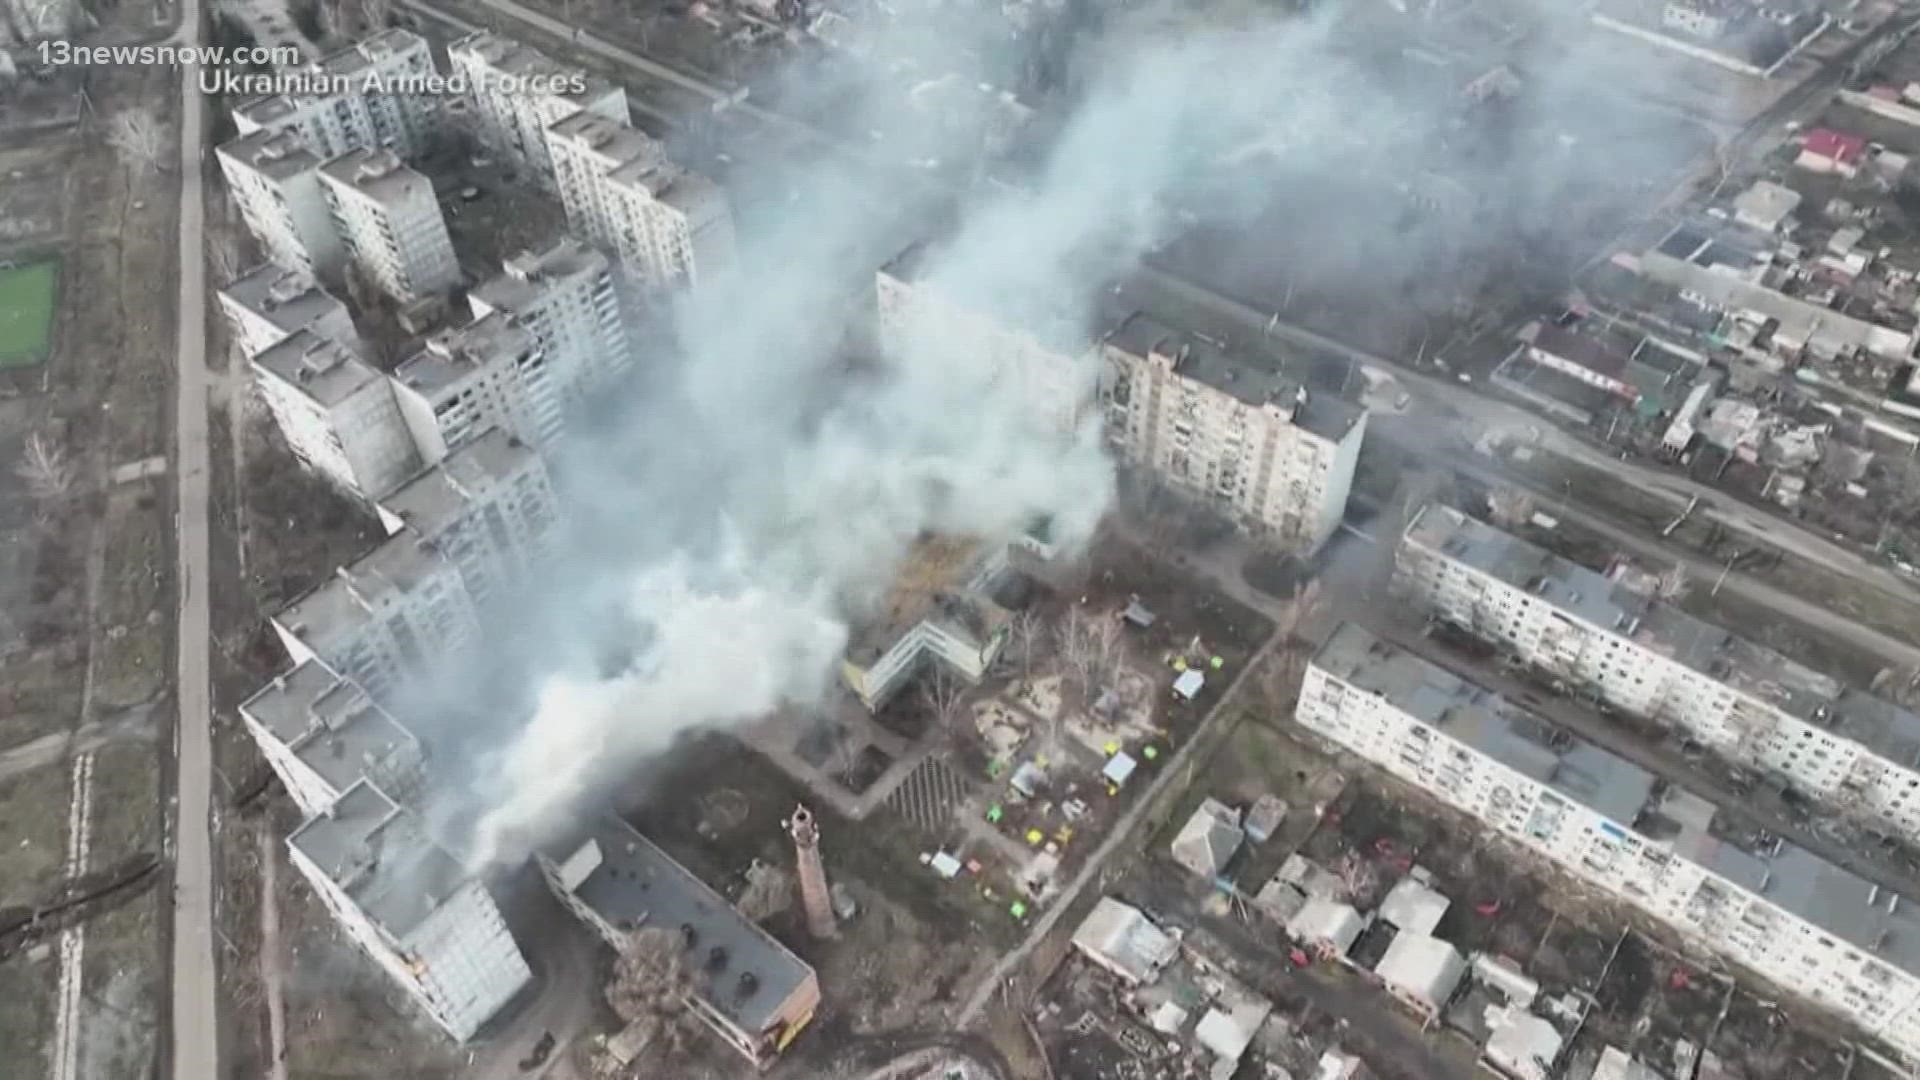 Ukrainian leaders said at least 10 civilians were killed, and 20 others were hurt, in attacks Friday.